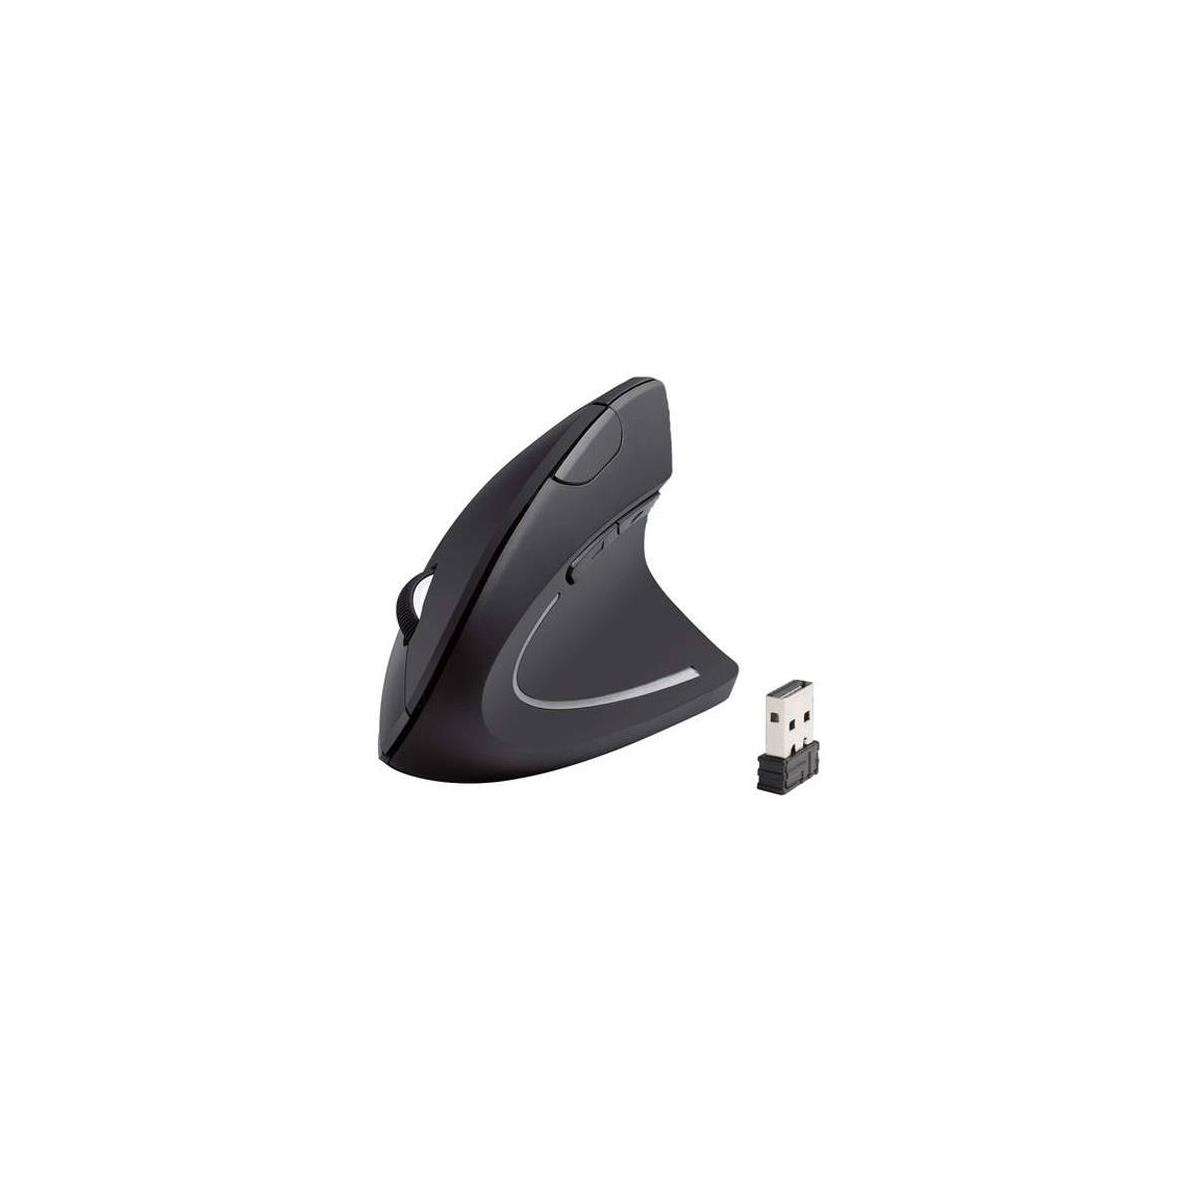 Image of iMicro MO-WVEO01 2.4GHz Wireless Vertical Ergonomic Optical Mouse